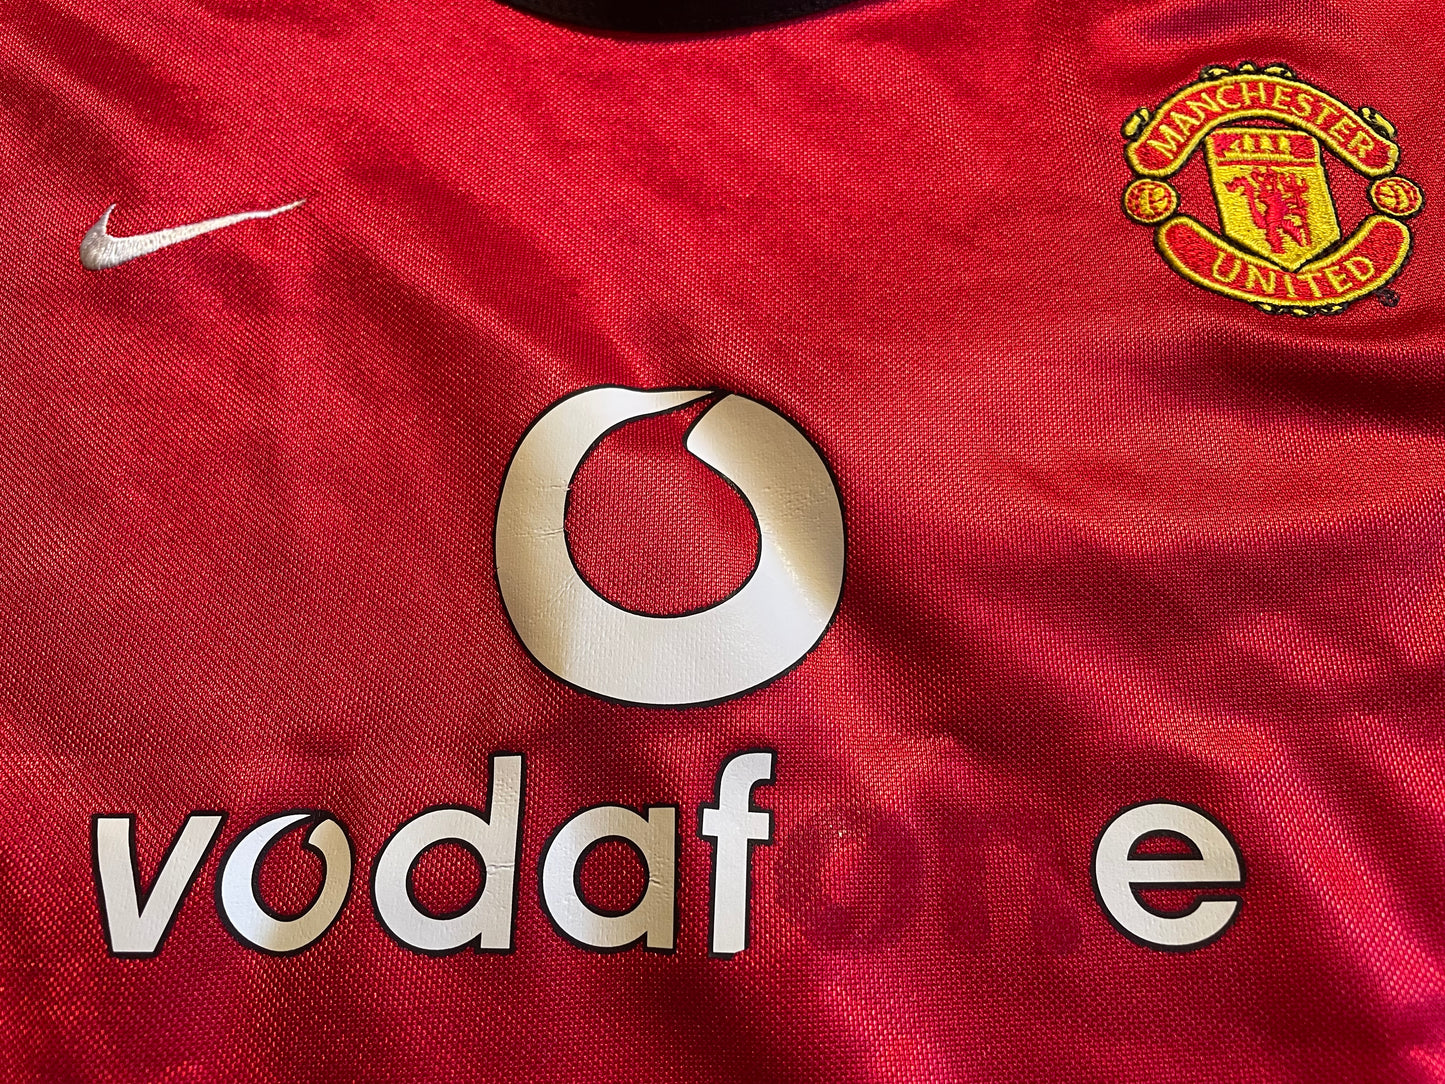 Man United Home Shirt 2002 (average) Kids. no size, 6 to 8 years? Height 14 inches